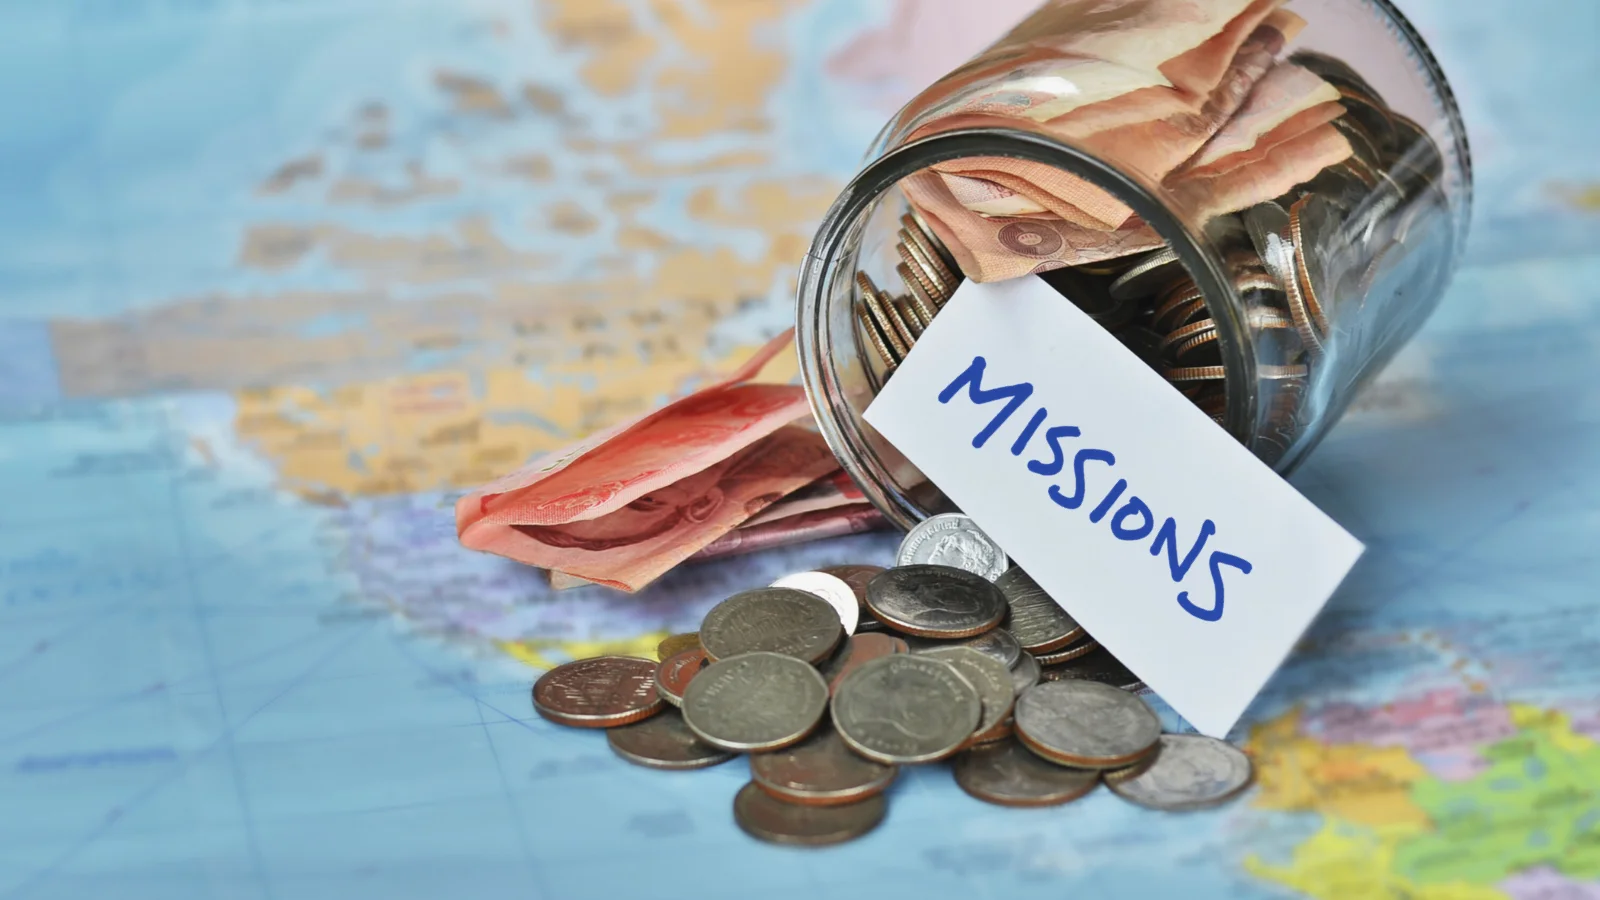 3 Basic Fundraising Tools for Missions